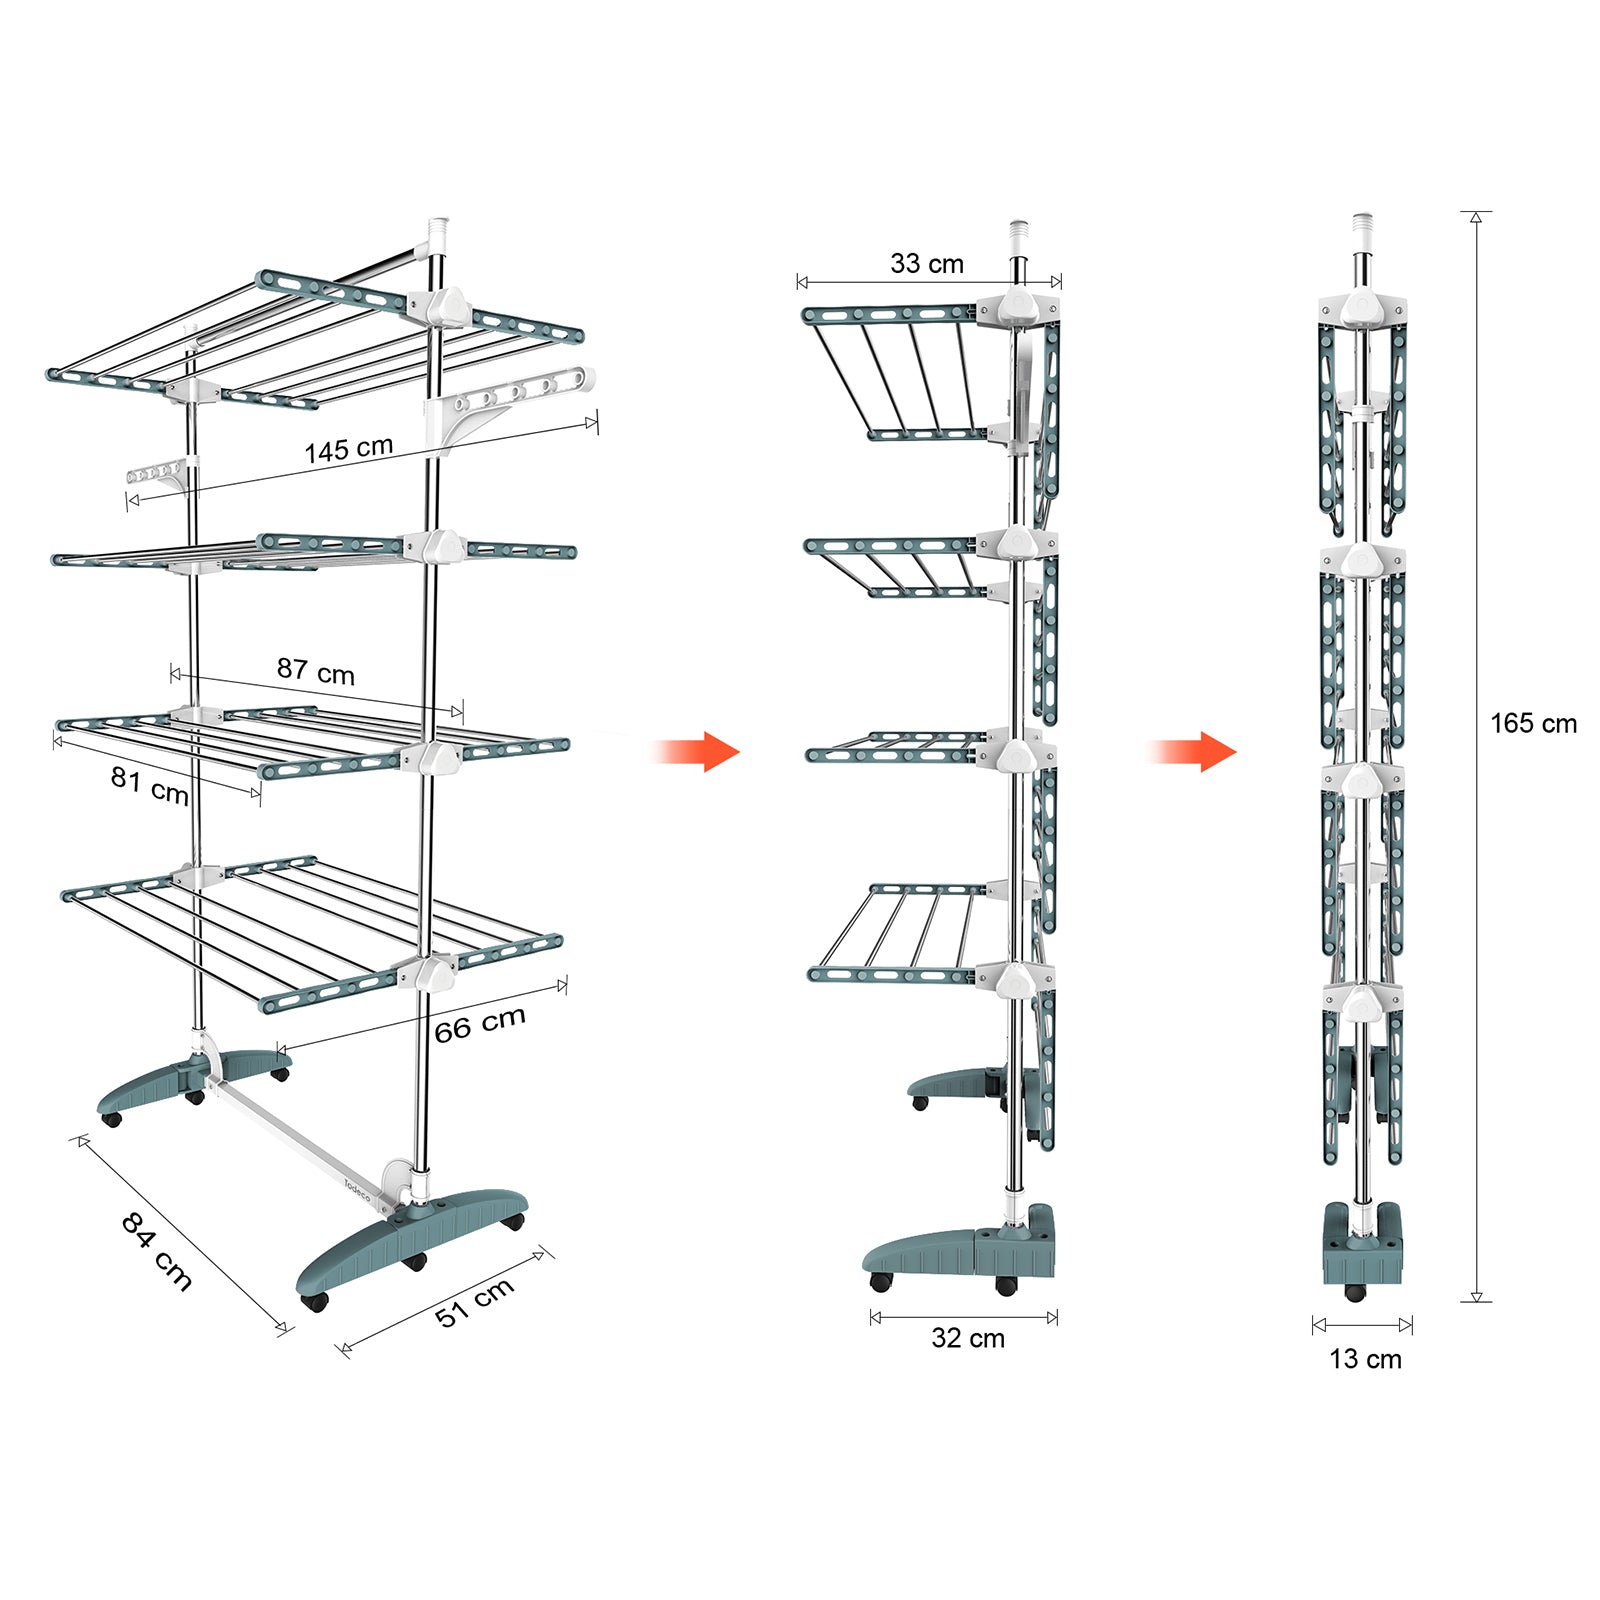 4-Tier-Folding-Clothes-Drying-Rack-Indoor-Stainless-Steel-Clothes-Drying-Rack-Foldable-Clothes-Dryer-with-Top-Bar-Height-Adjustable-Wings-for-Patio-Garden-Teal-4-Tier-Folding-Clothes-Drying-Rack-Indoor-Stainless-Steel-Clothes-Drying-Rack-Teal